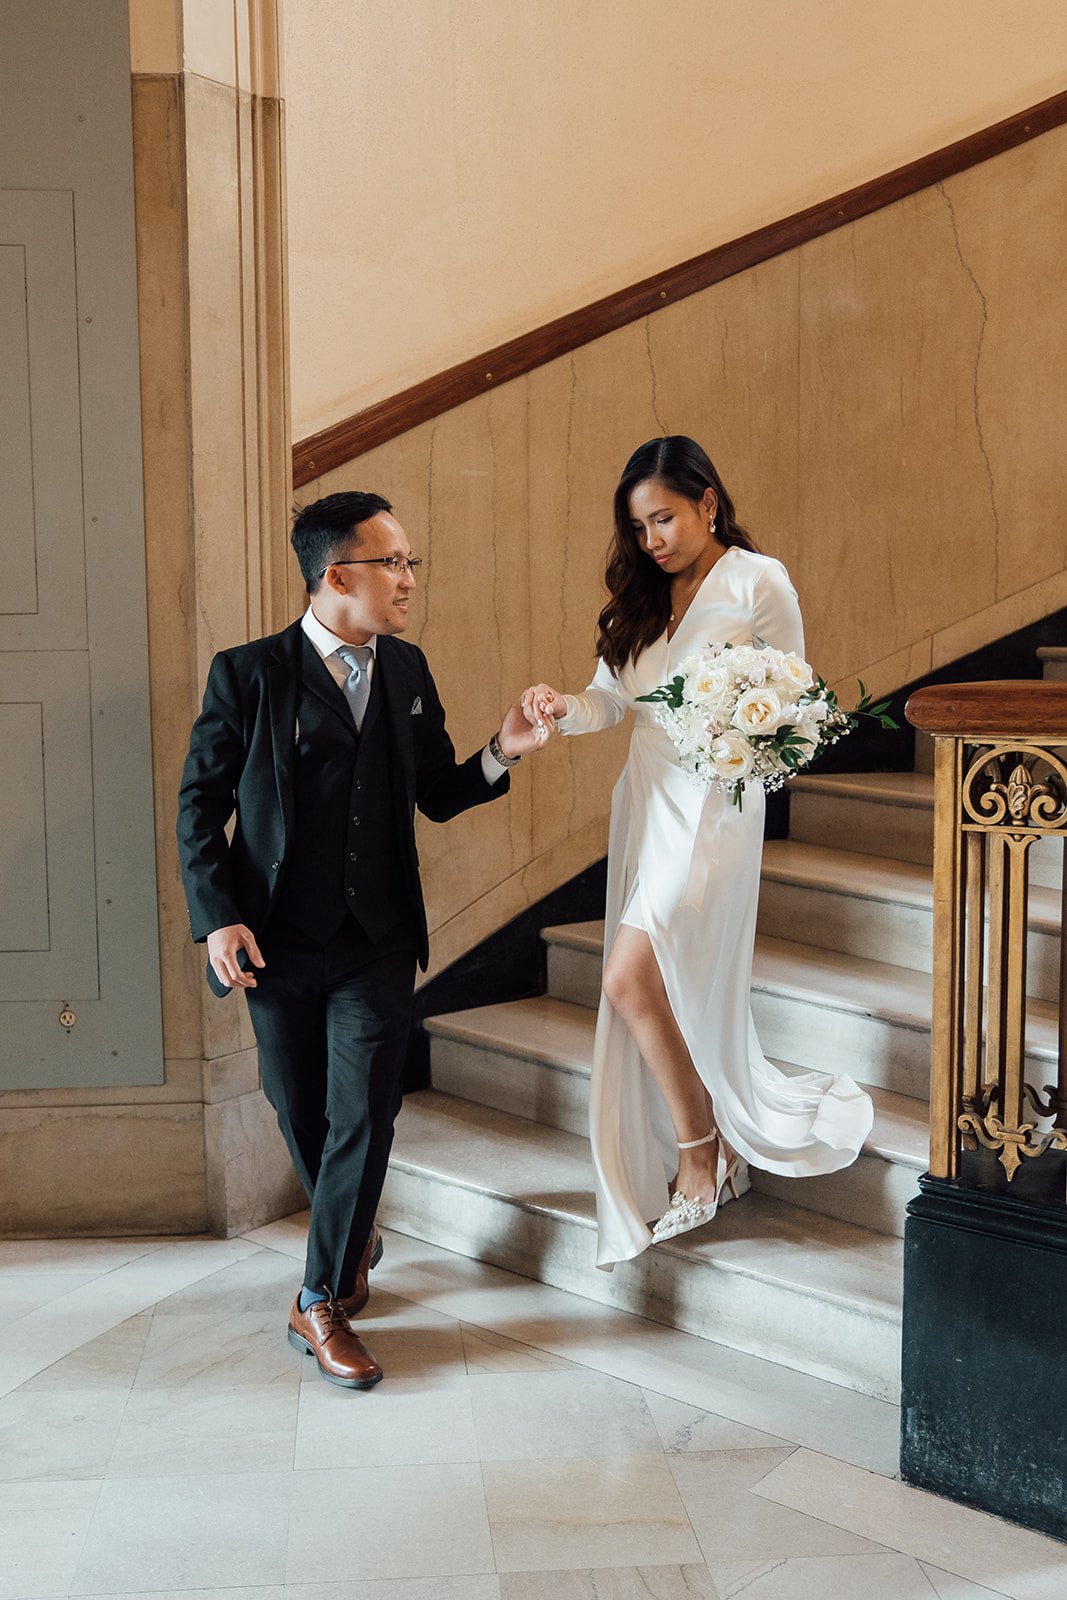 10 Ways to Make Your Elopement Even More Unique and Personal